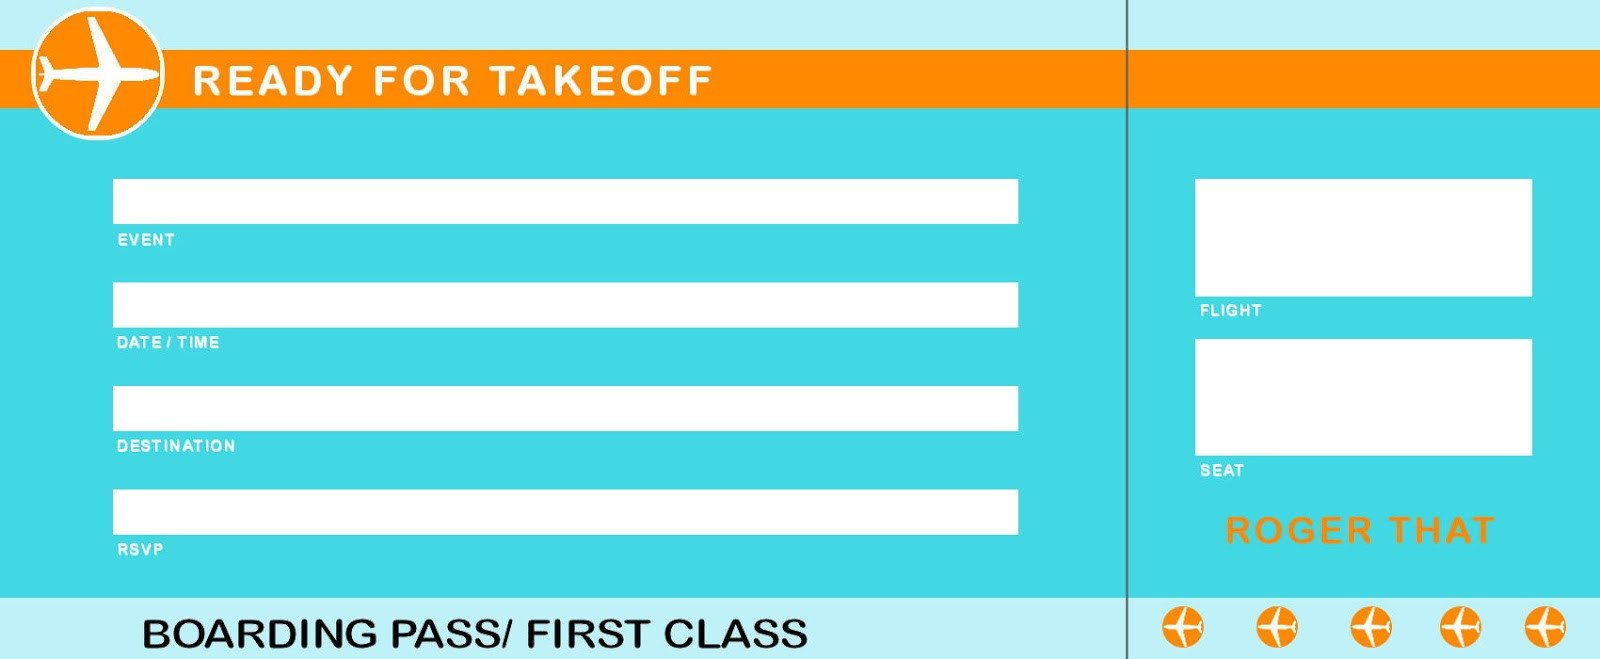 Fake Boarding Pass Template 001 Template Ideas Fake Airline Ticket Imposing Delta